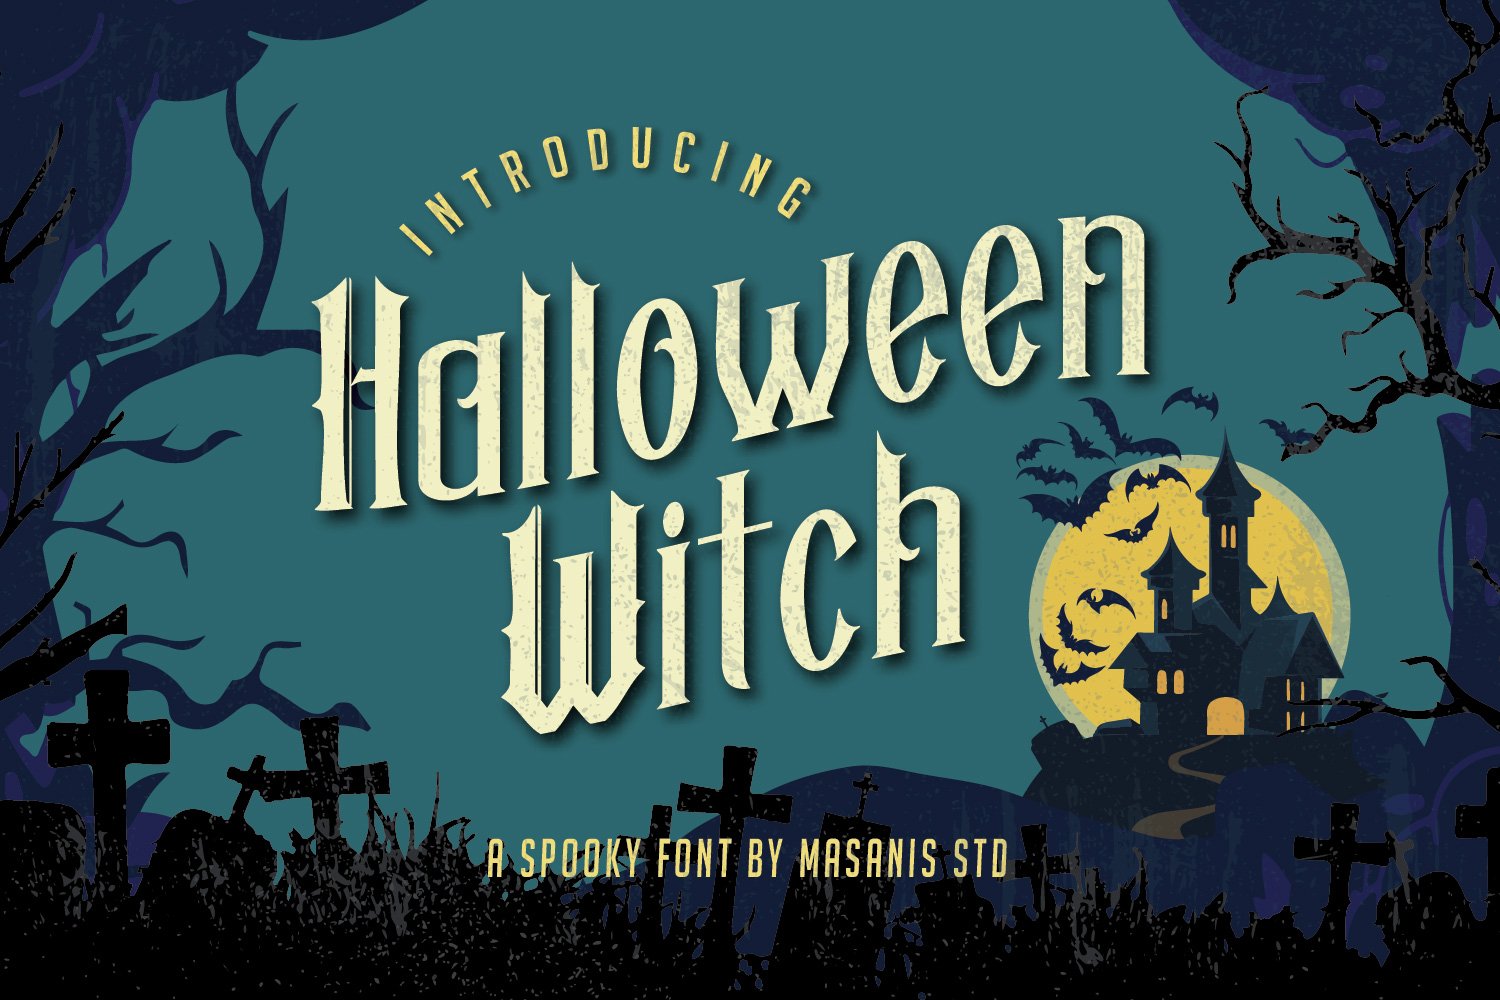 Halloween Witch - Spooky Font cover image.